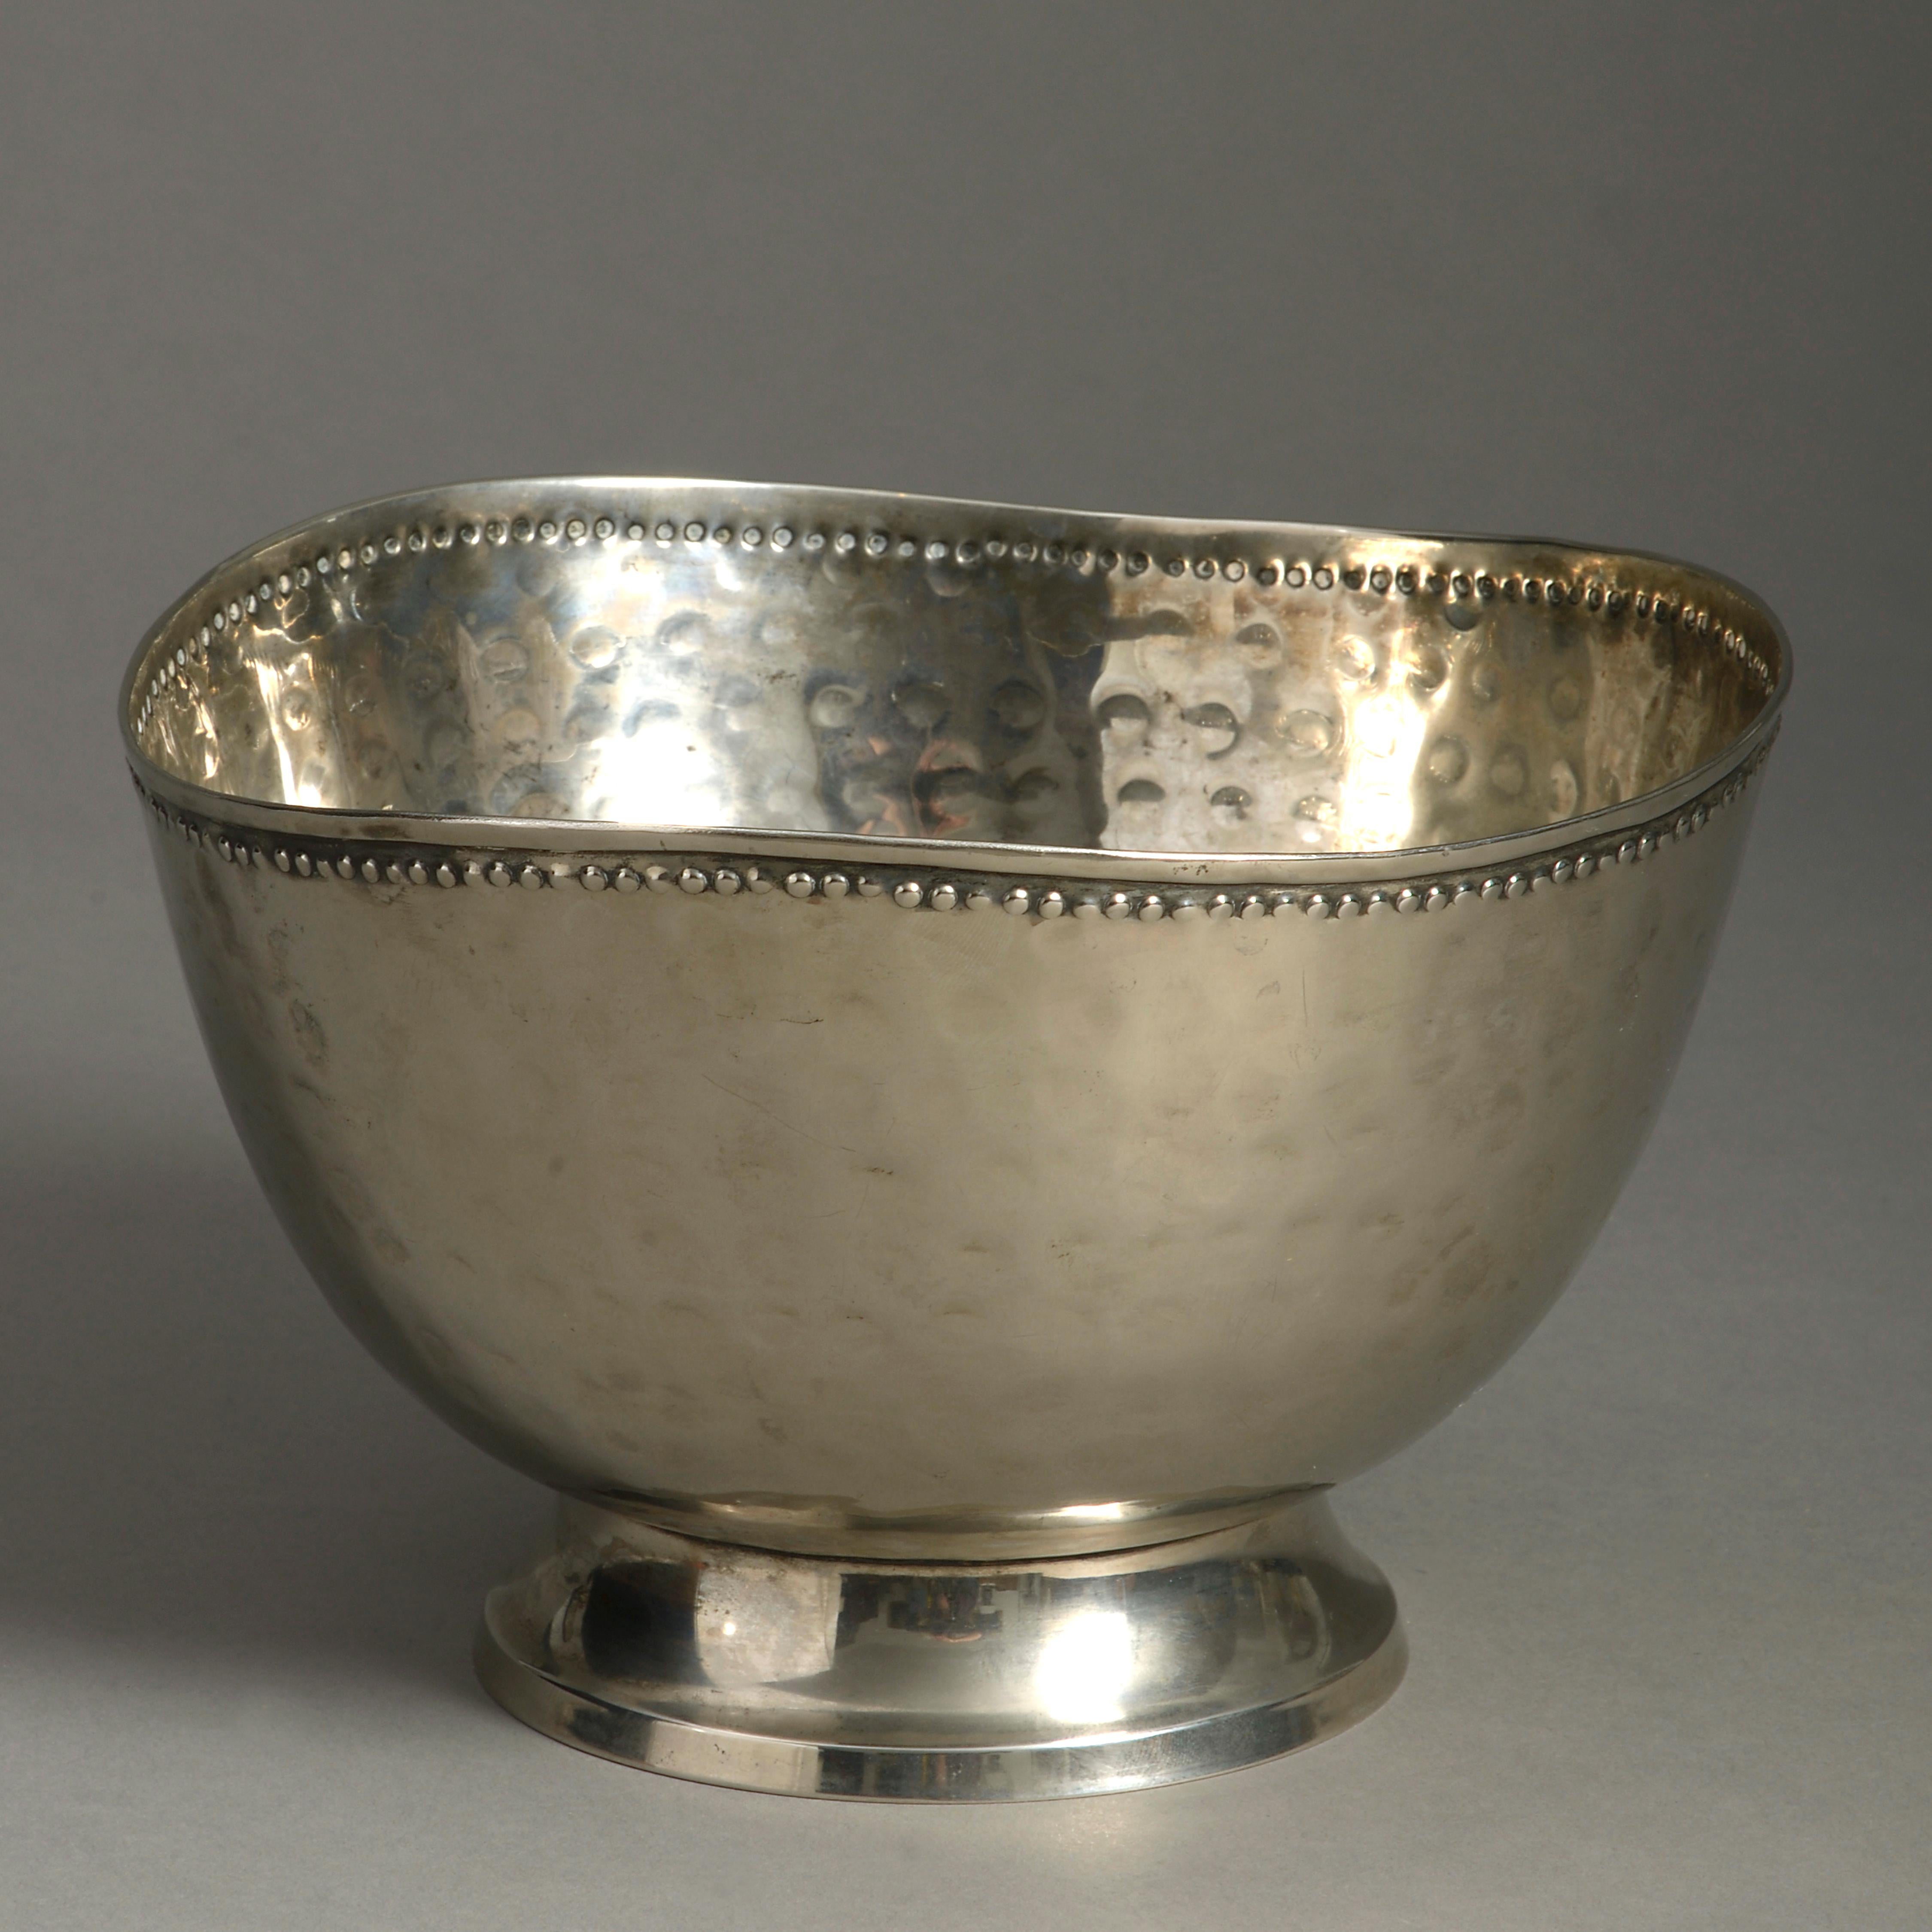 A mid-20th century silver-plated bowl, the body with hammered decoration, the undulating rim with beaded decoration, all set upon a turned foot.

 